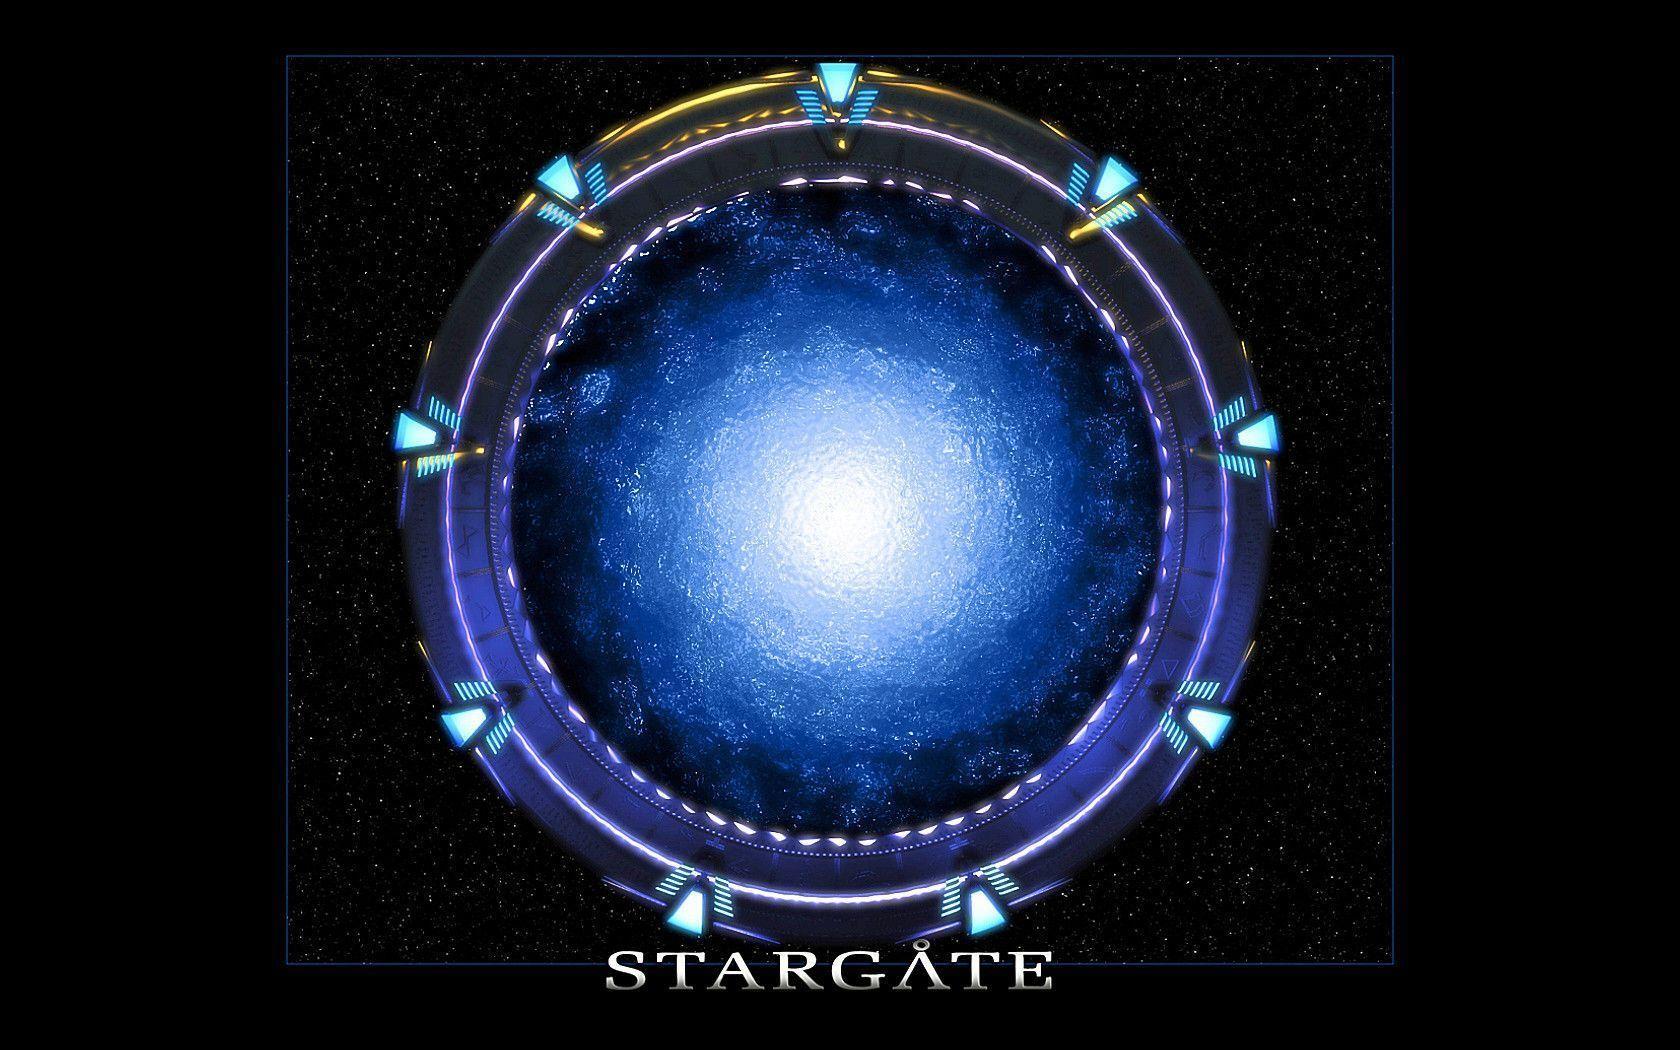 Stargate image The Stargate HD wallpaper and background photo